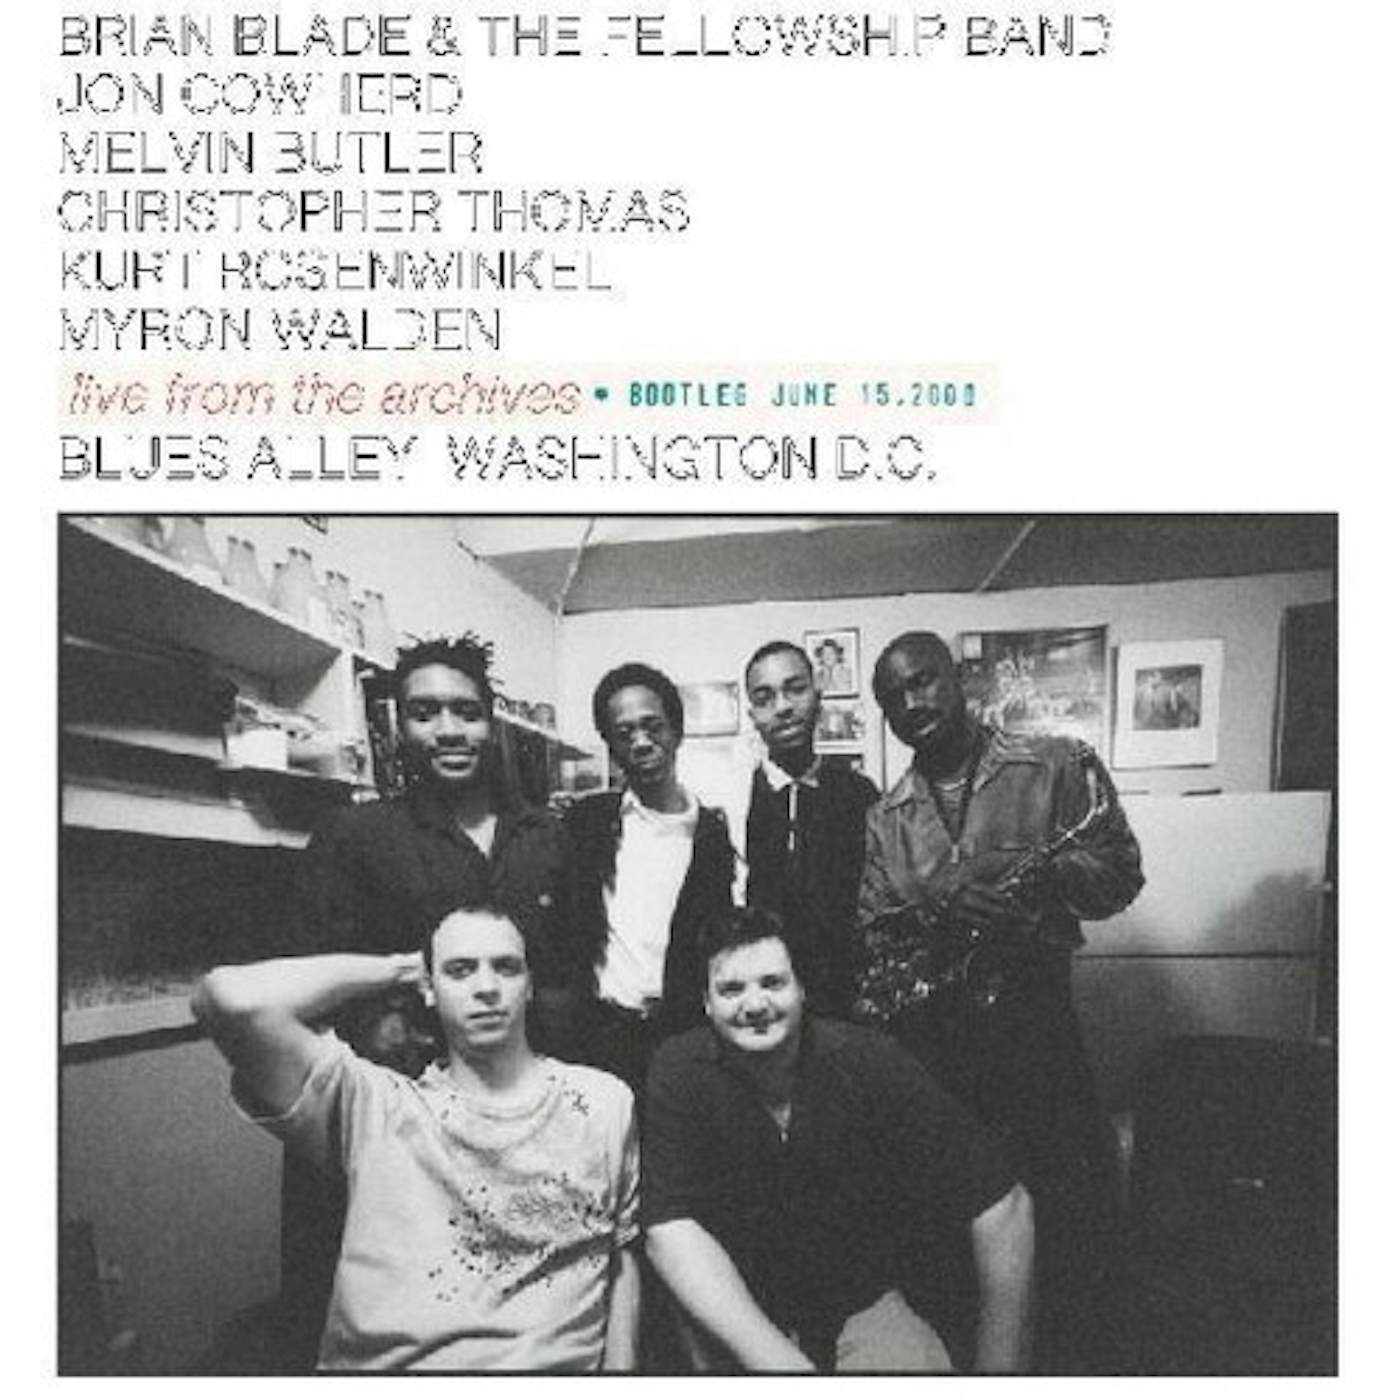 Brian Blade & The Fellowship Band LIVE FROM THE ARCHIVES - BOOTLEG JUNE 15, 2000 CD